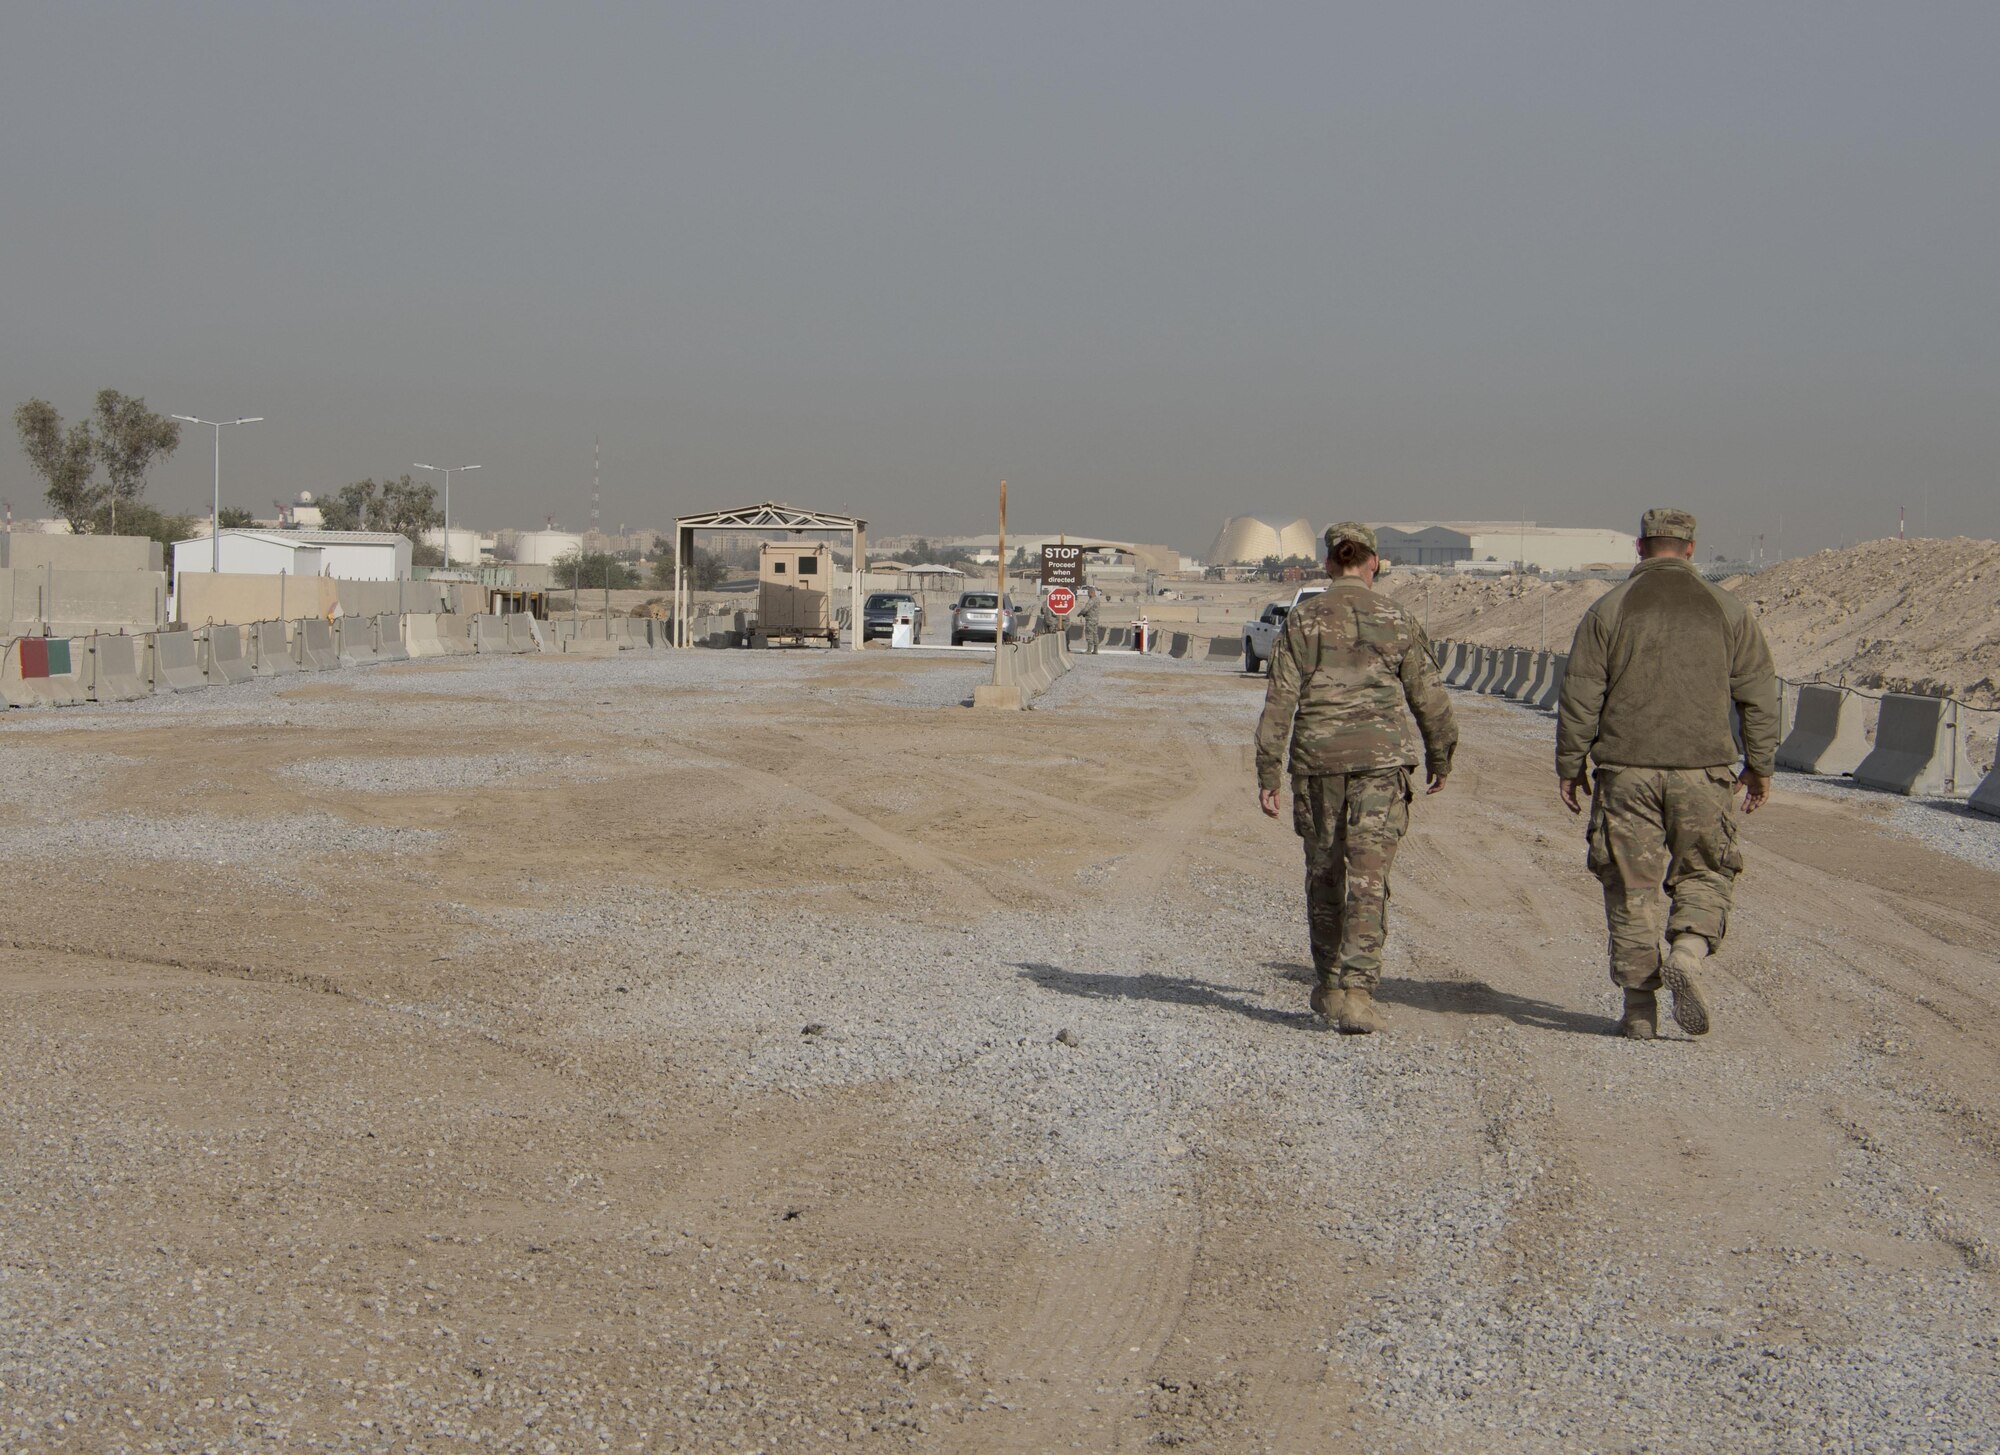 Tech. Sgt. Lora Ramos, left, and Senior Airman William Klein, right, of the 557th RED HORSE walk down a newly built road at an undisclosed location in Southwest Asia Dec. 30, 2016. The 387th Air Expeditionary Group enlisted the help of various squadrons and groups to complete the new road and entry control point in approximately four months. (U.S. Air Force photo/Senior Airman Andrew Park)